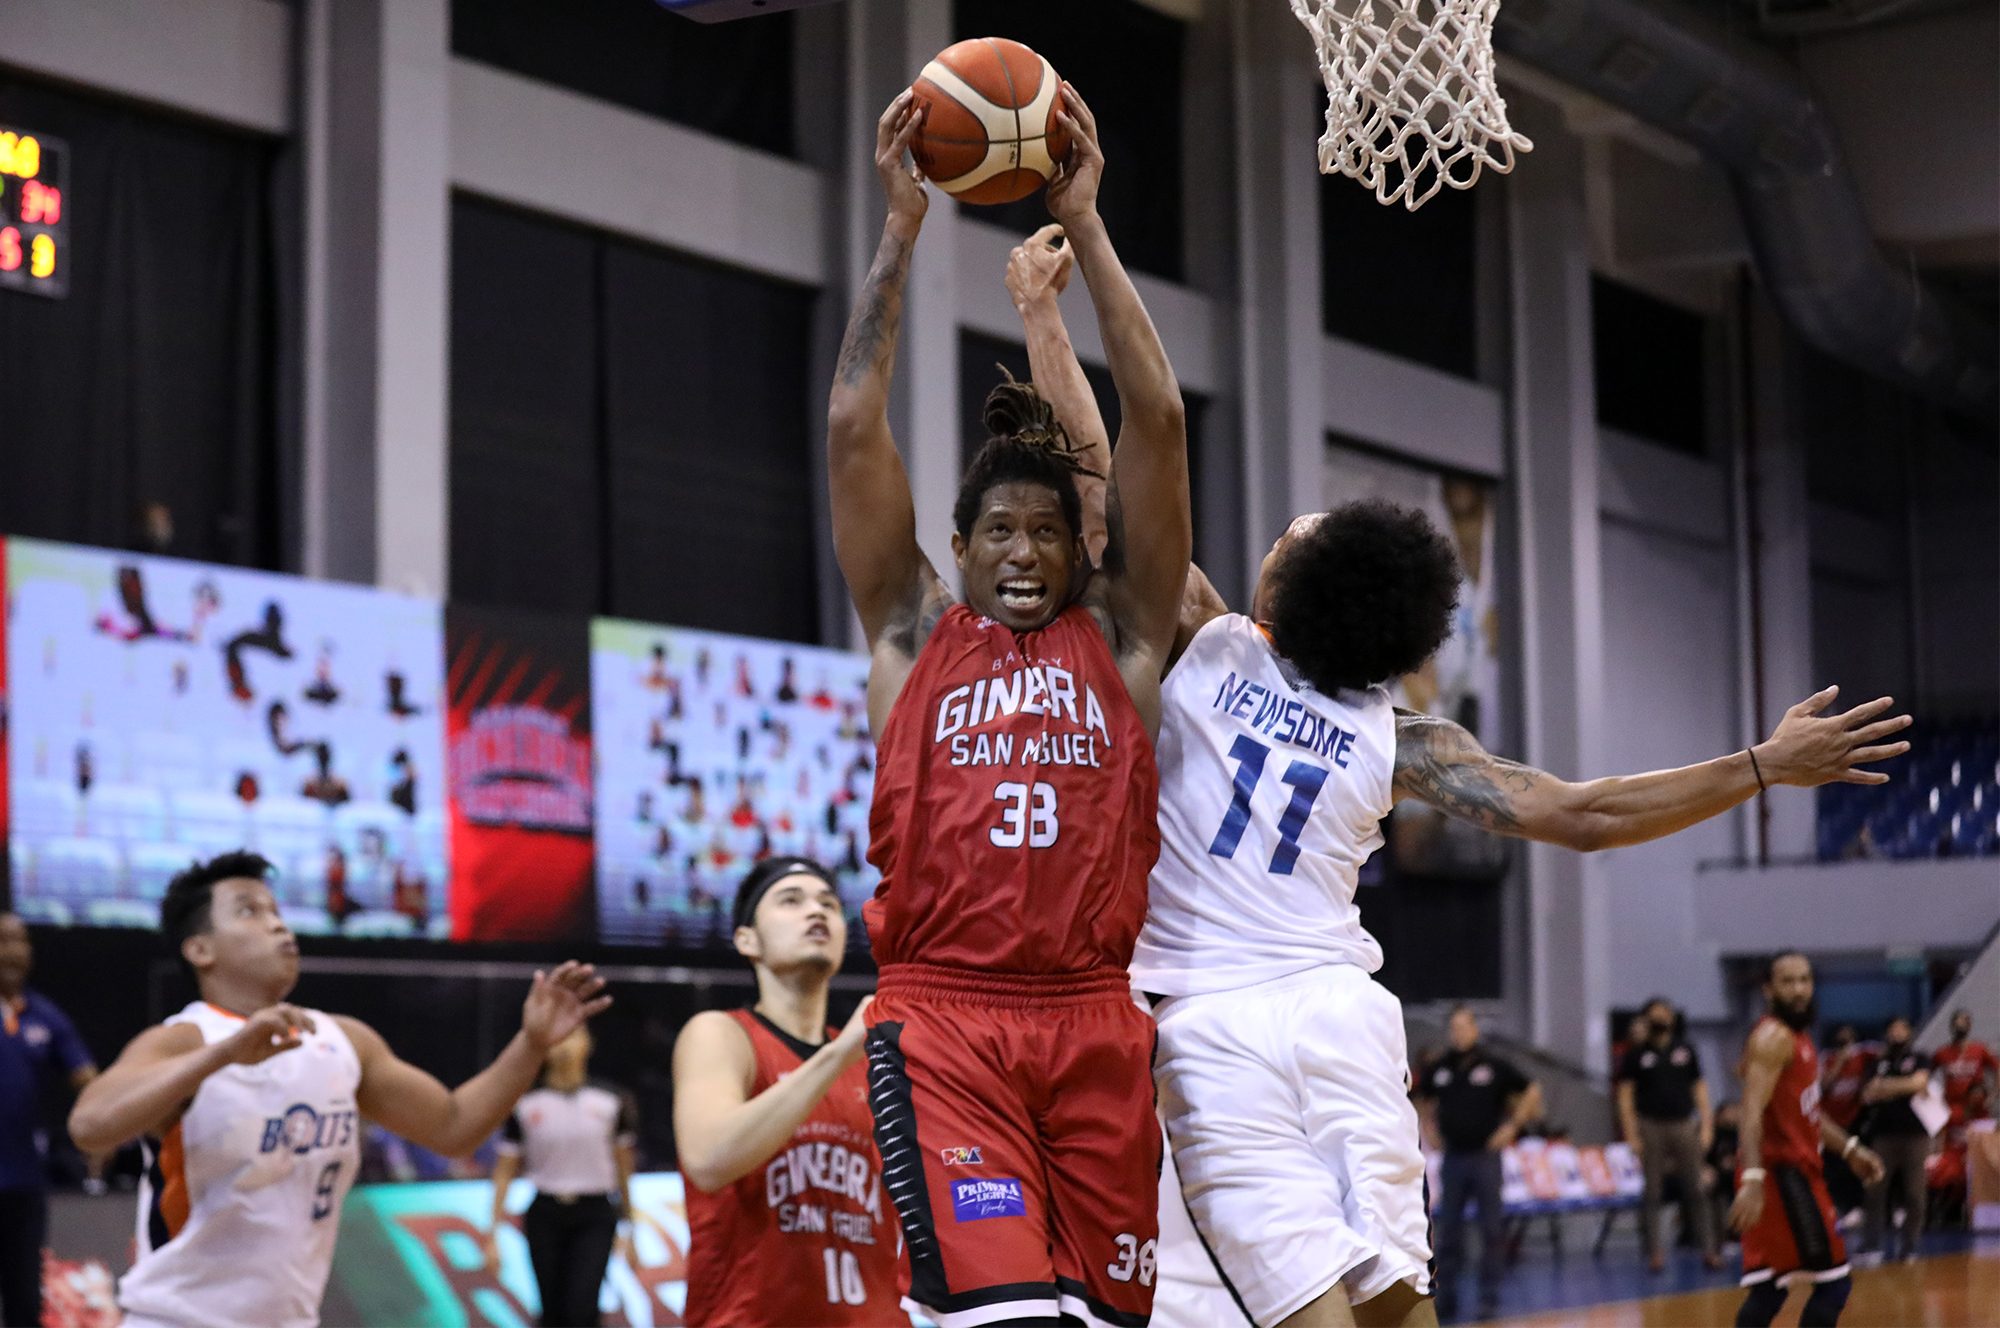 ‘Most important guy’ Devance directs game plan in Ginebra win